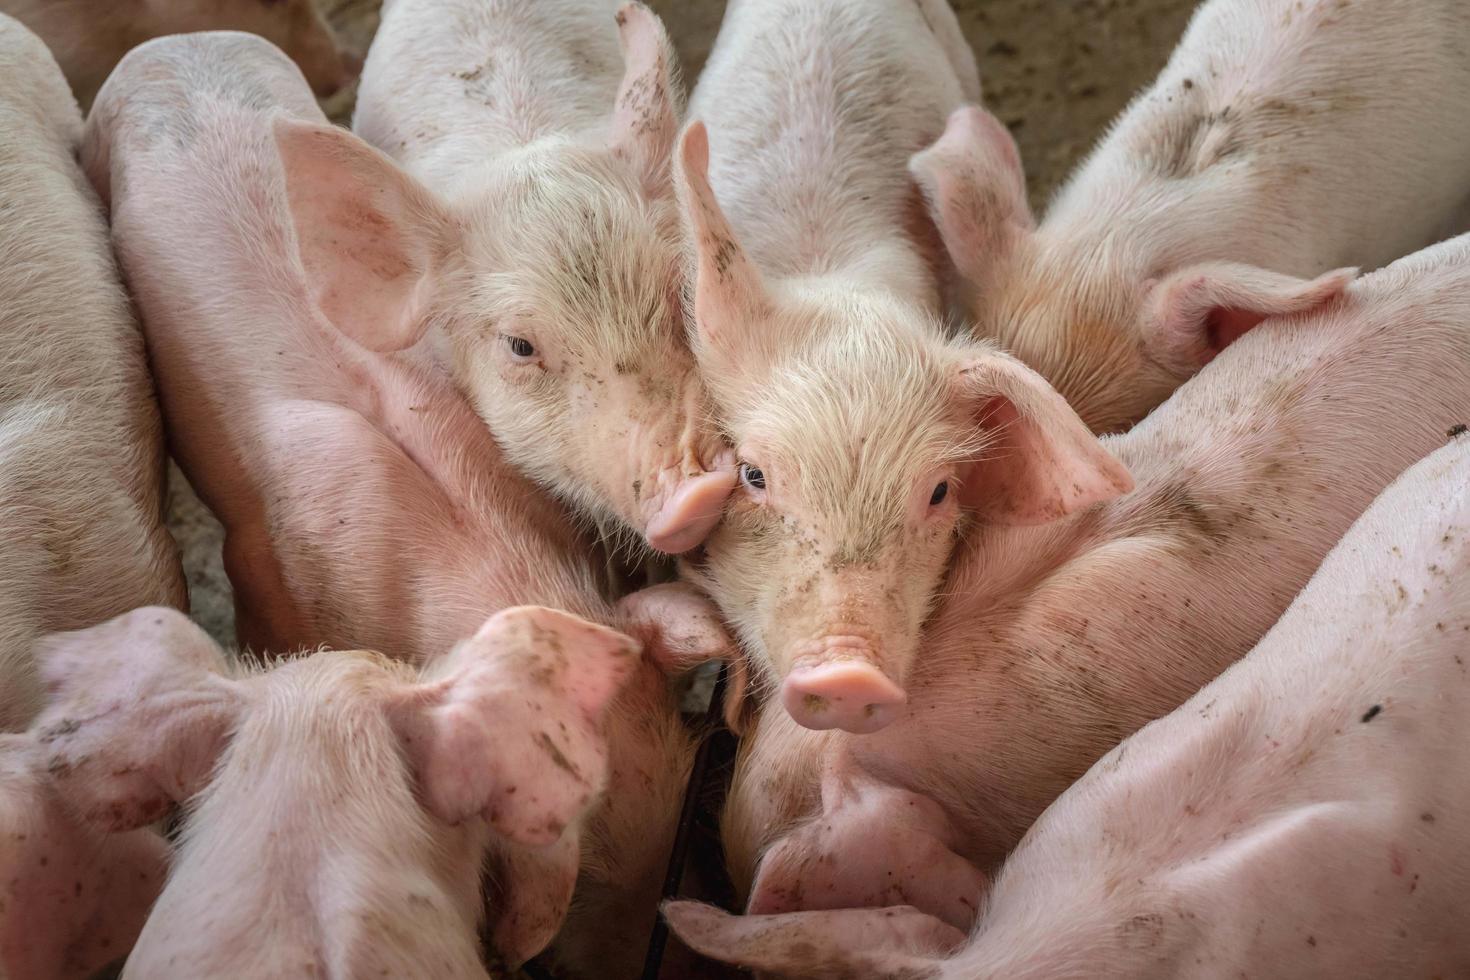 Piglets are scrambling to eat food in a pig farm. photo